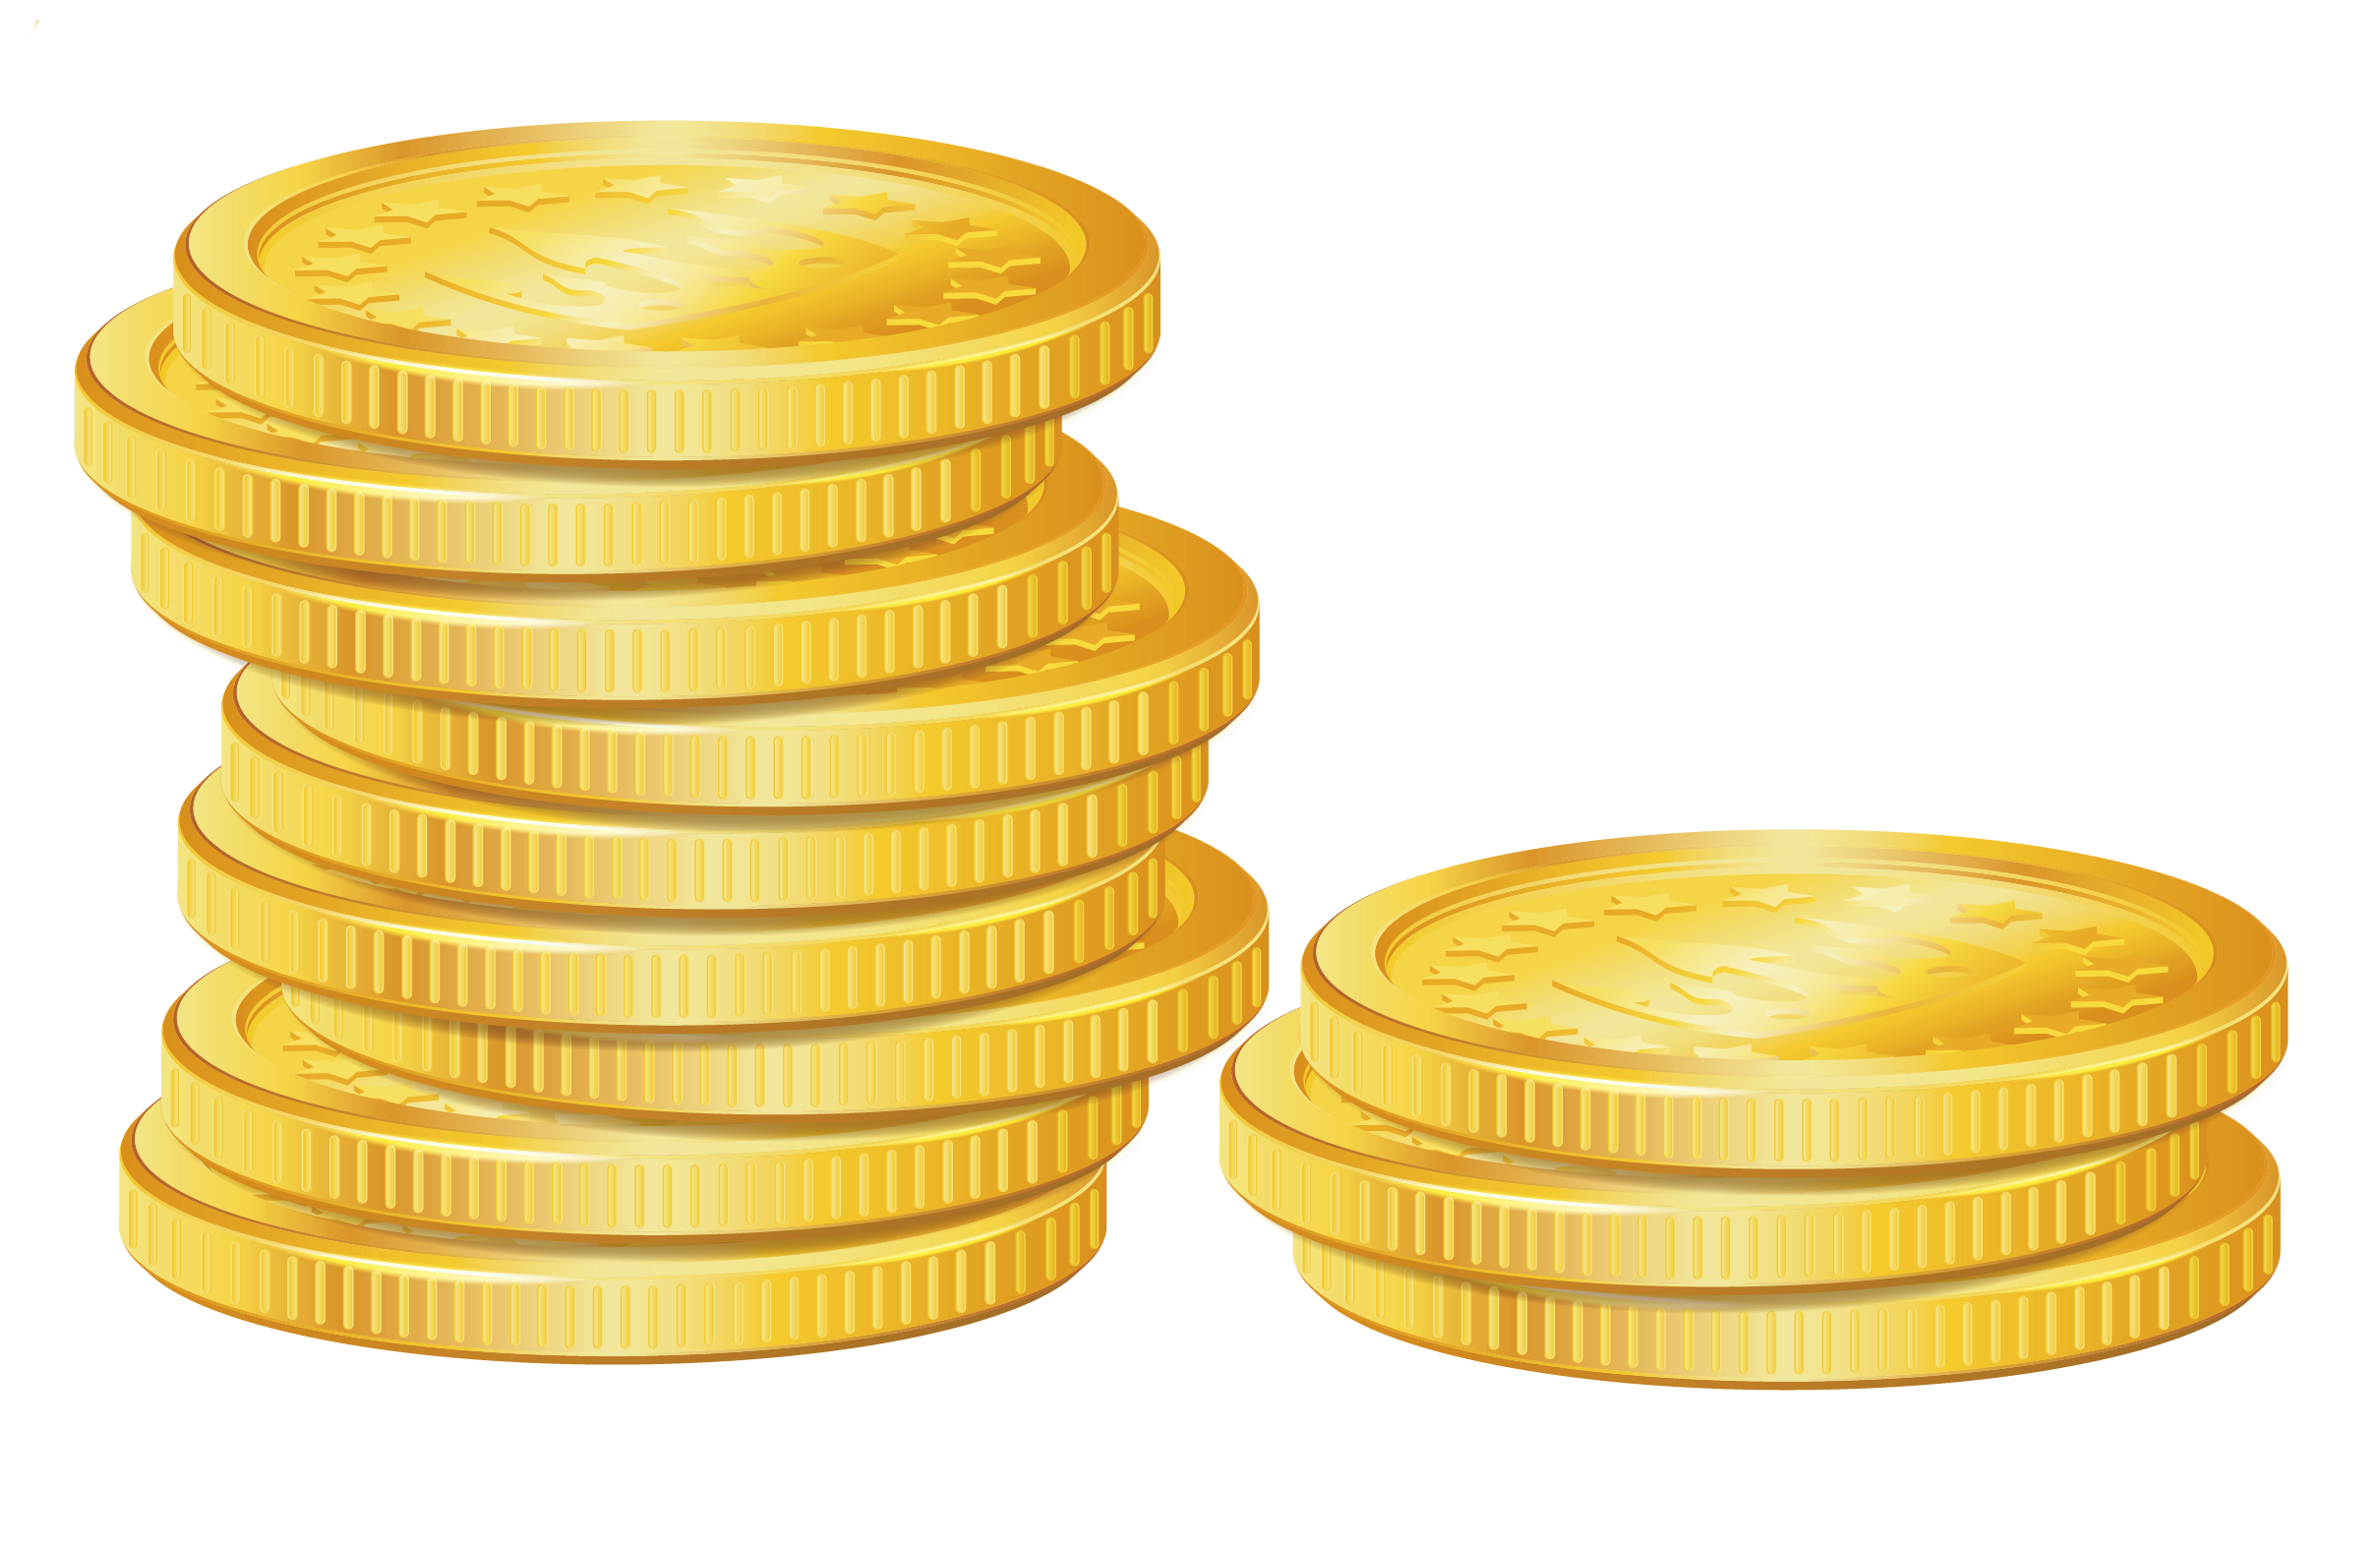 Pile of coins picture clipart